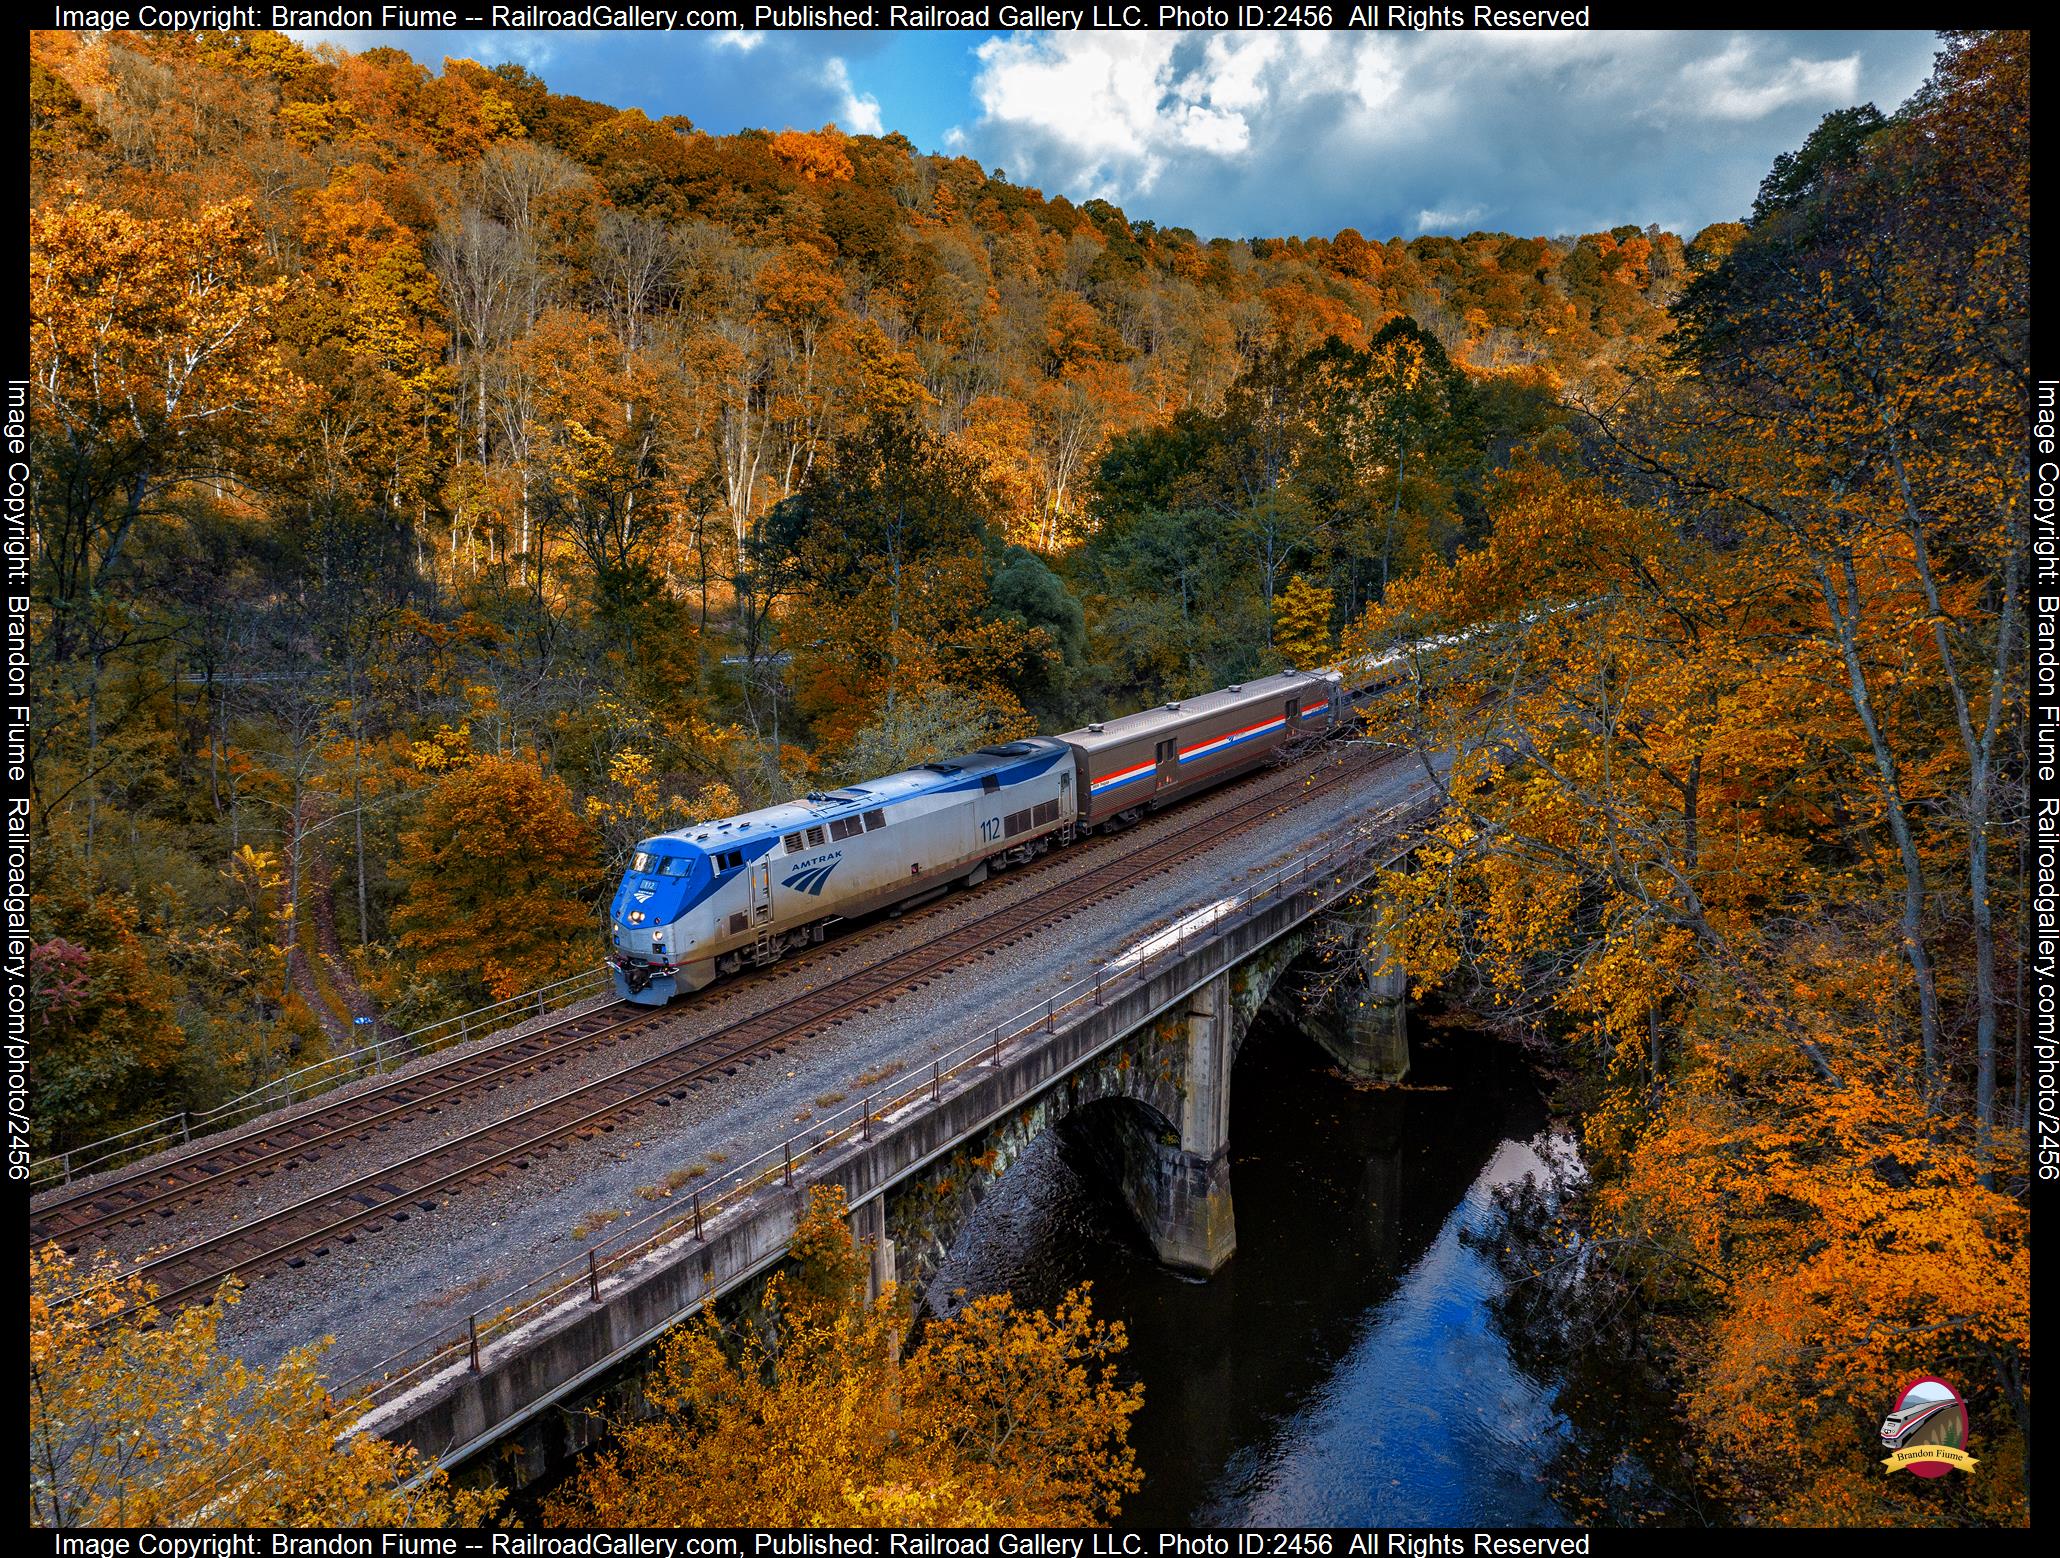 AMTK 112 is a class GE P42DC and  is pictured in Tyrone , Pennsylvania , USA.  This was taken along the Pittsburgh Line on the Amtrak. Photo Copyright: Brandon Fiume uploaded to Railroad Gallery on 11/16/2023. This photograph of AMTK 112 was taken on Sunday, October 15, 2023. All Rights Reserved. 